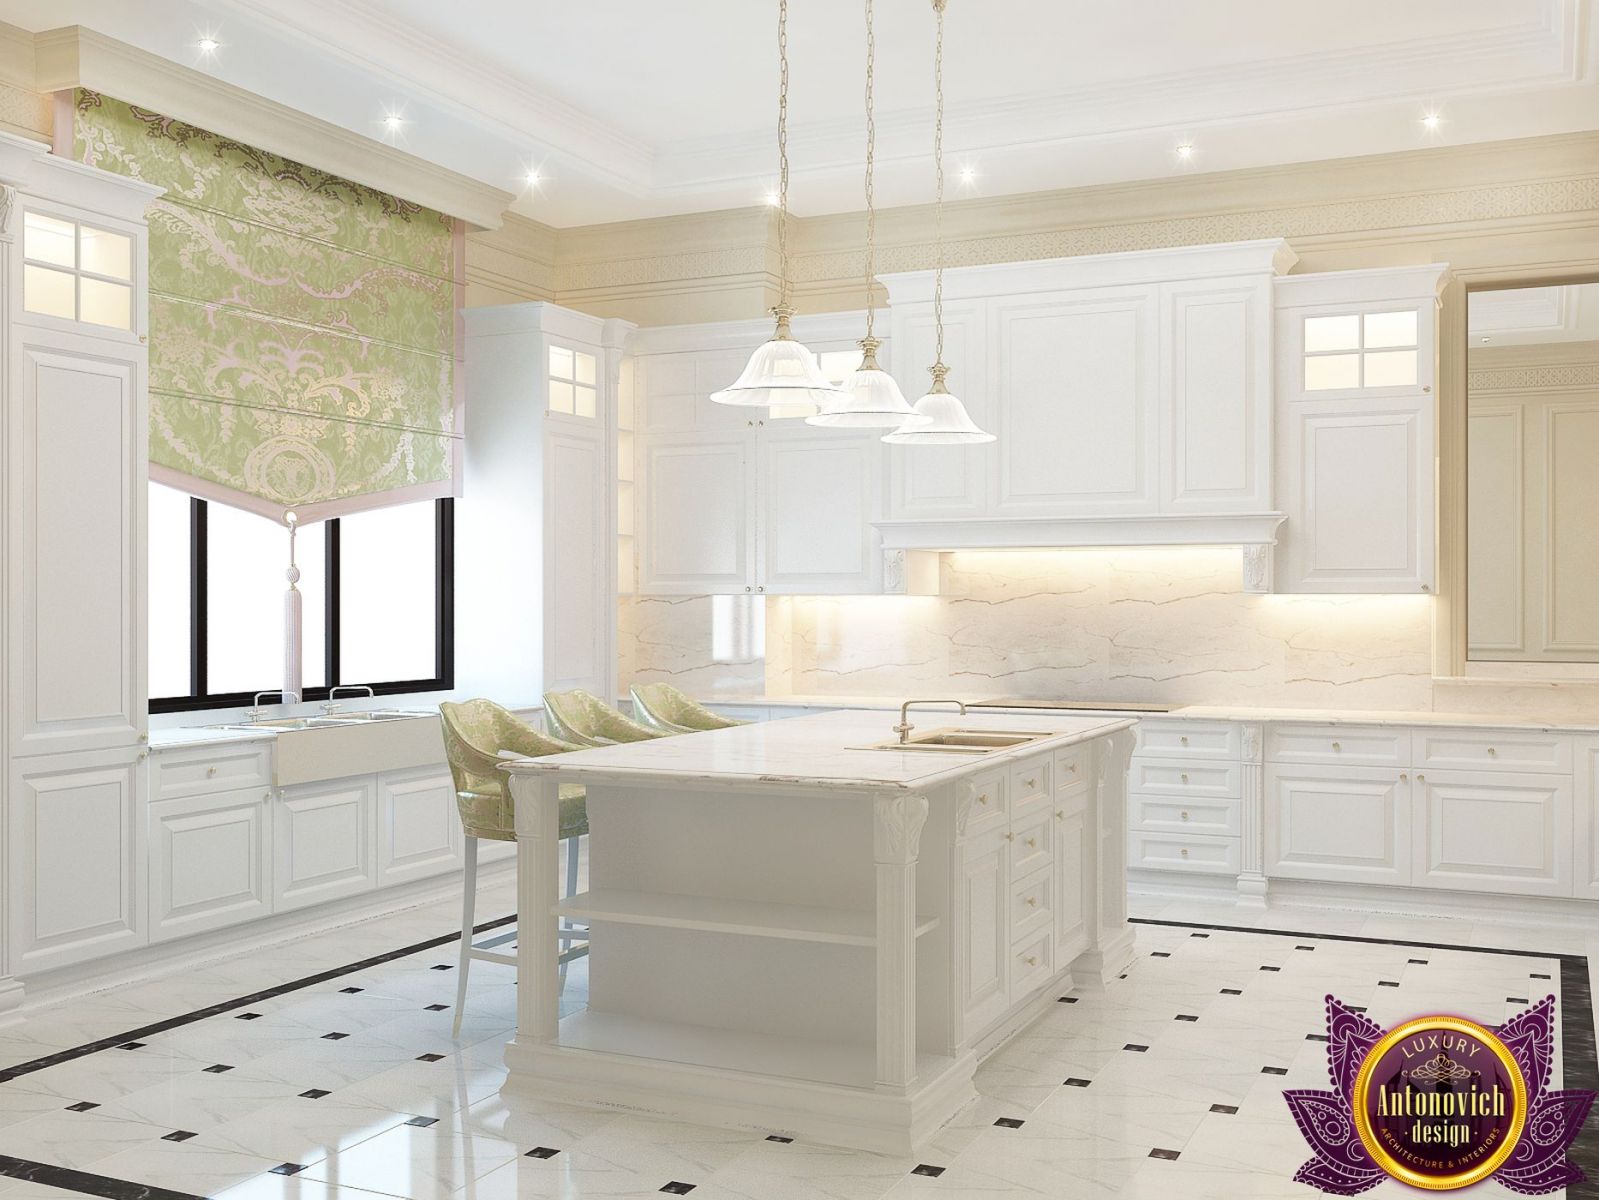 Sophisticated kitchen cabinetry and lighting by Antonovich Group